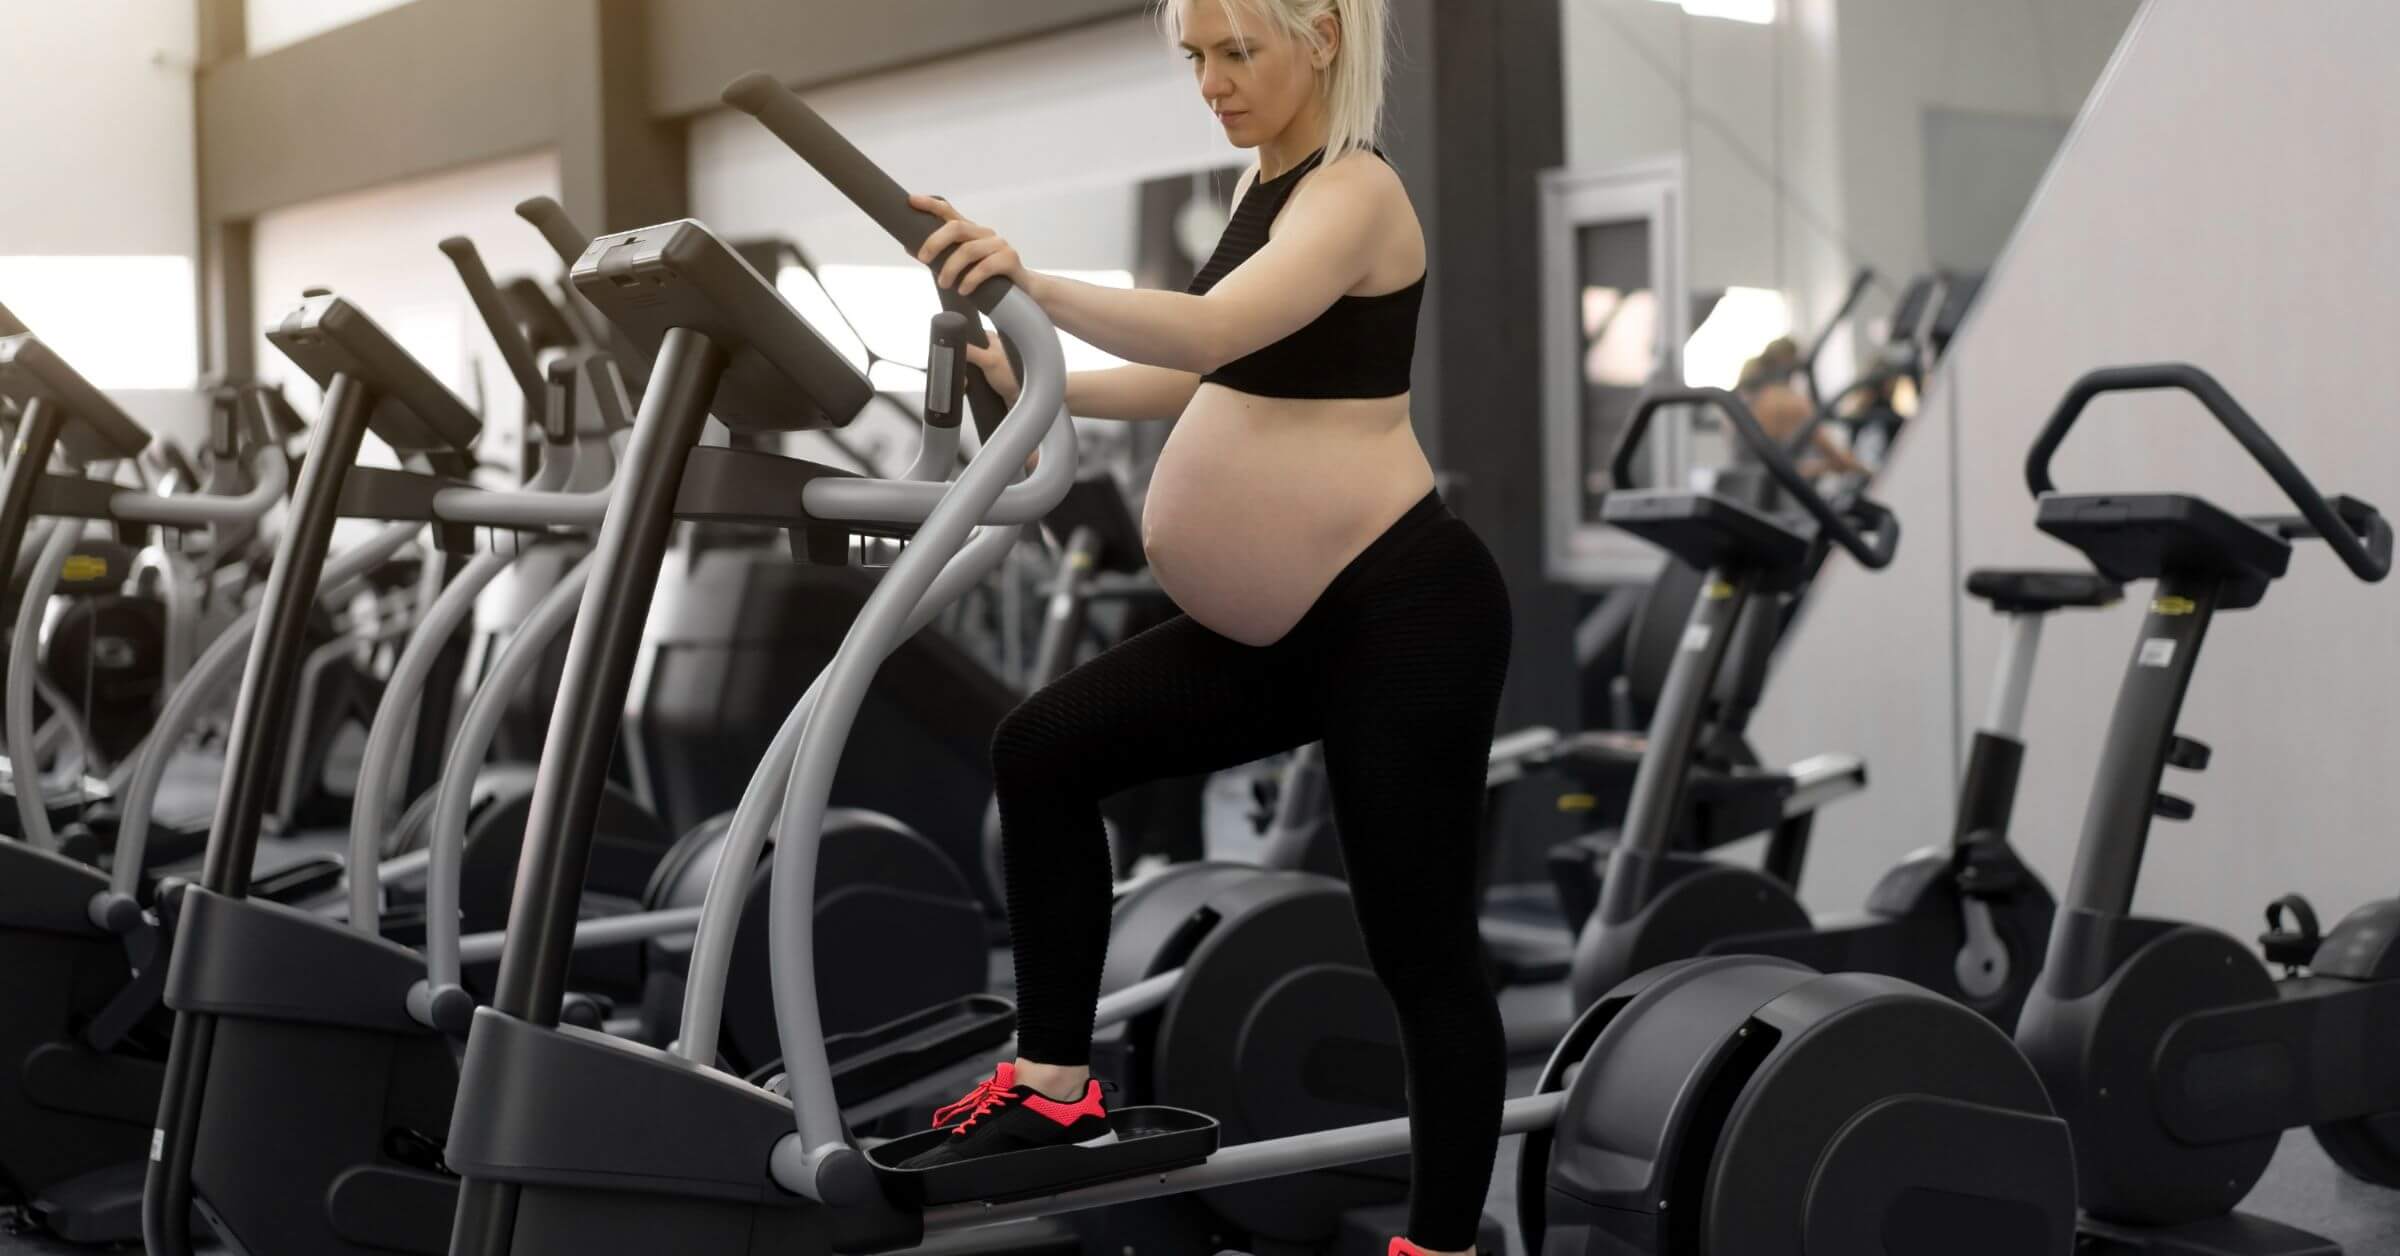 It is okay to use elliptical during pregnancy